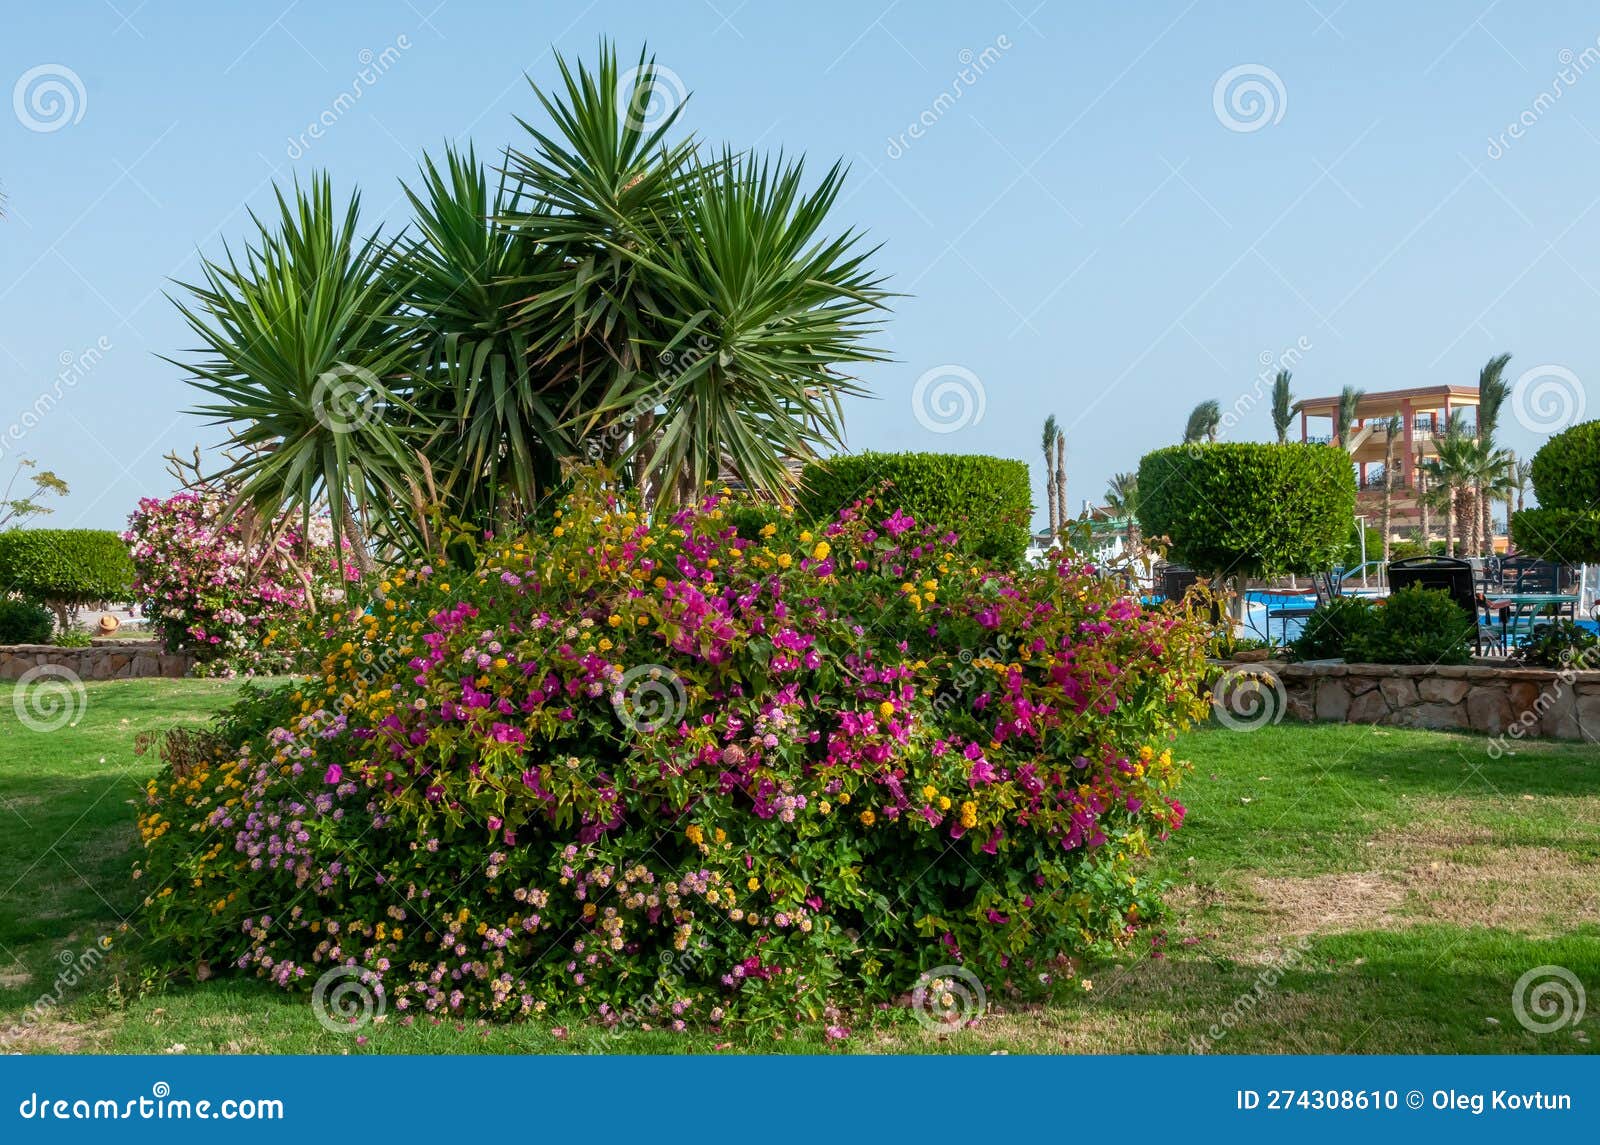 a group of flowering plants and yucca at a hotel in marsa alama, egypt